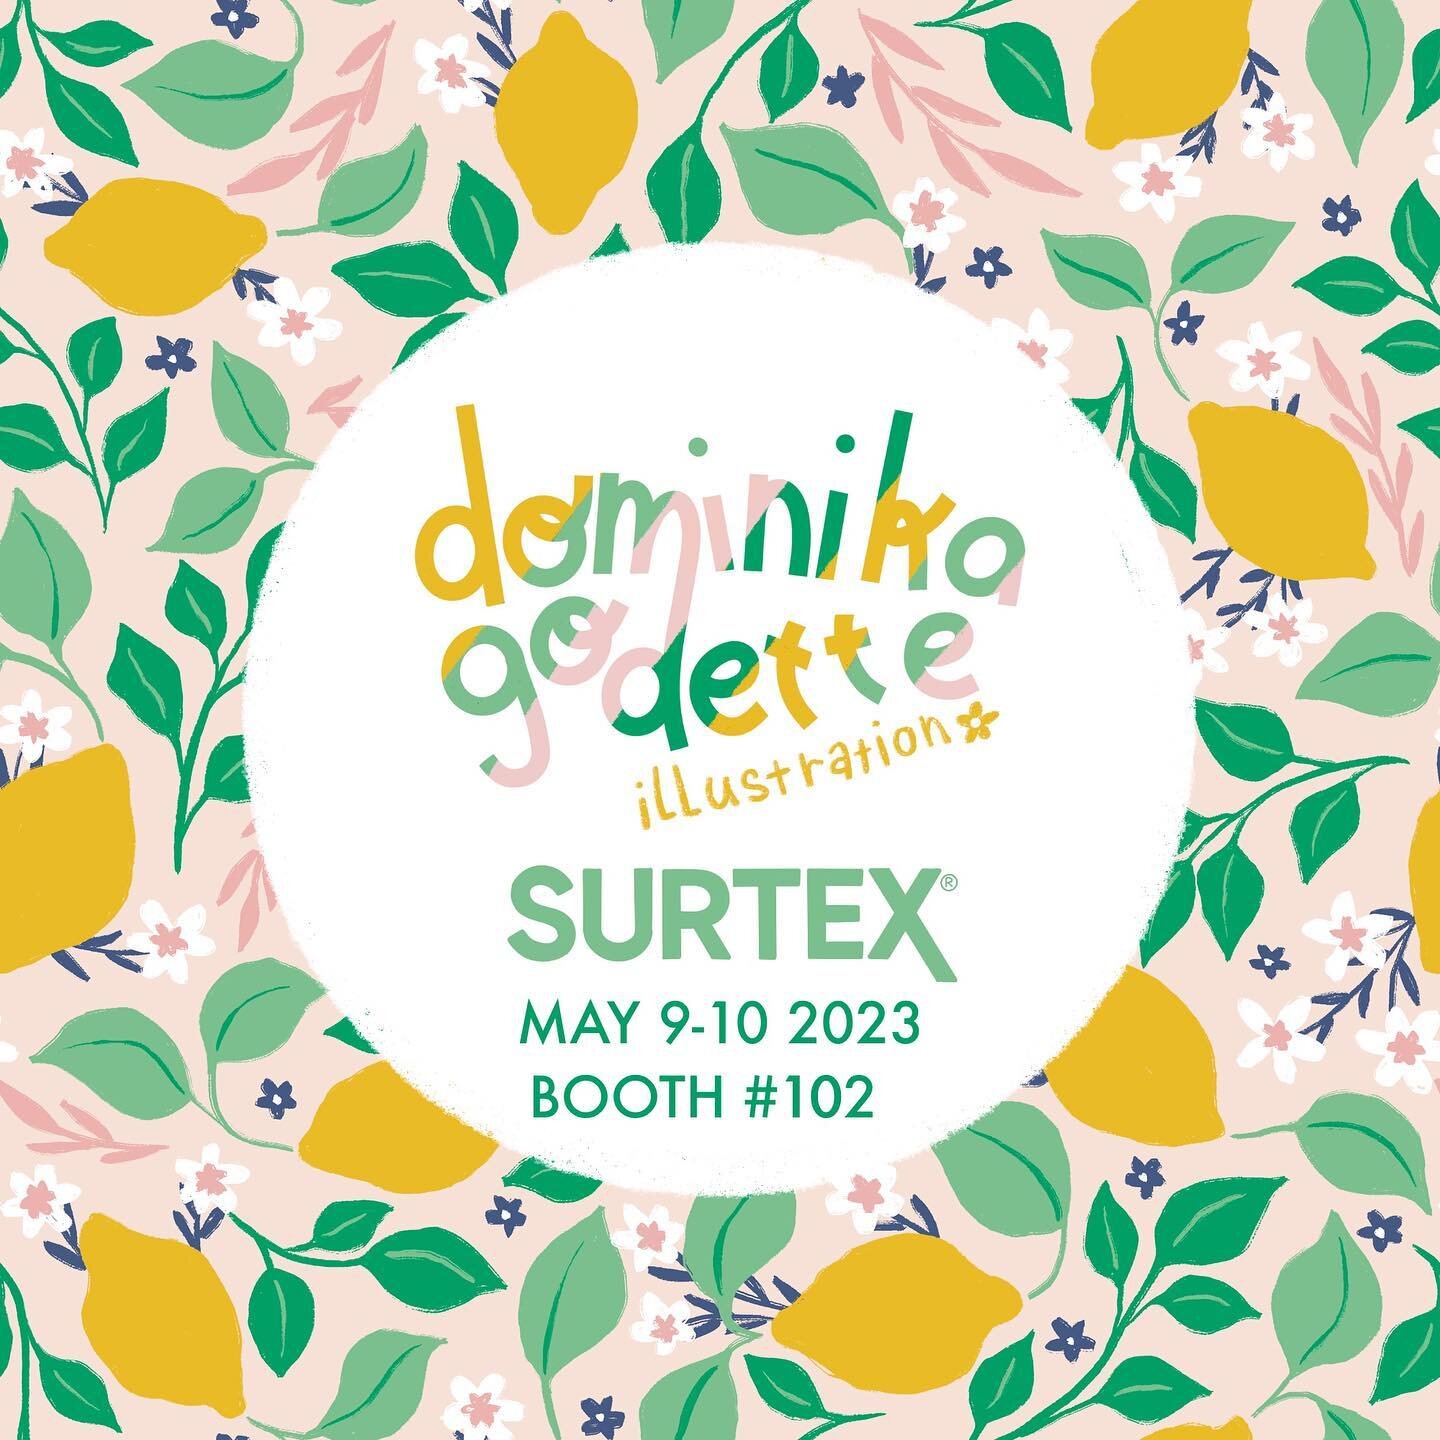 Happy Monday everyone! Looking forward to seeing you at @surtexshow in a week at booth #102. Make an appointment or just stop by ❤️
.
.
.
#surtex2023 #tradeshow #arlicensing #licensingshow #patternillustration #surfacepatterndesigners #surfacepattern